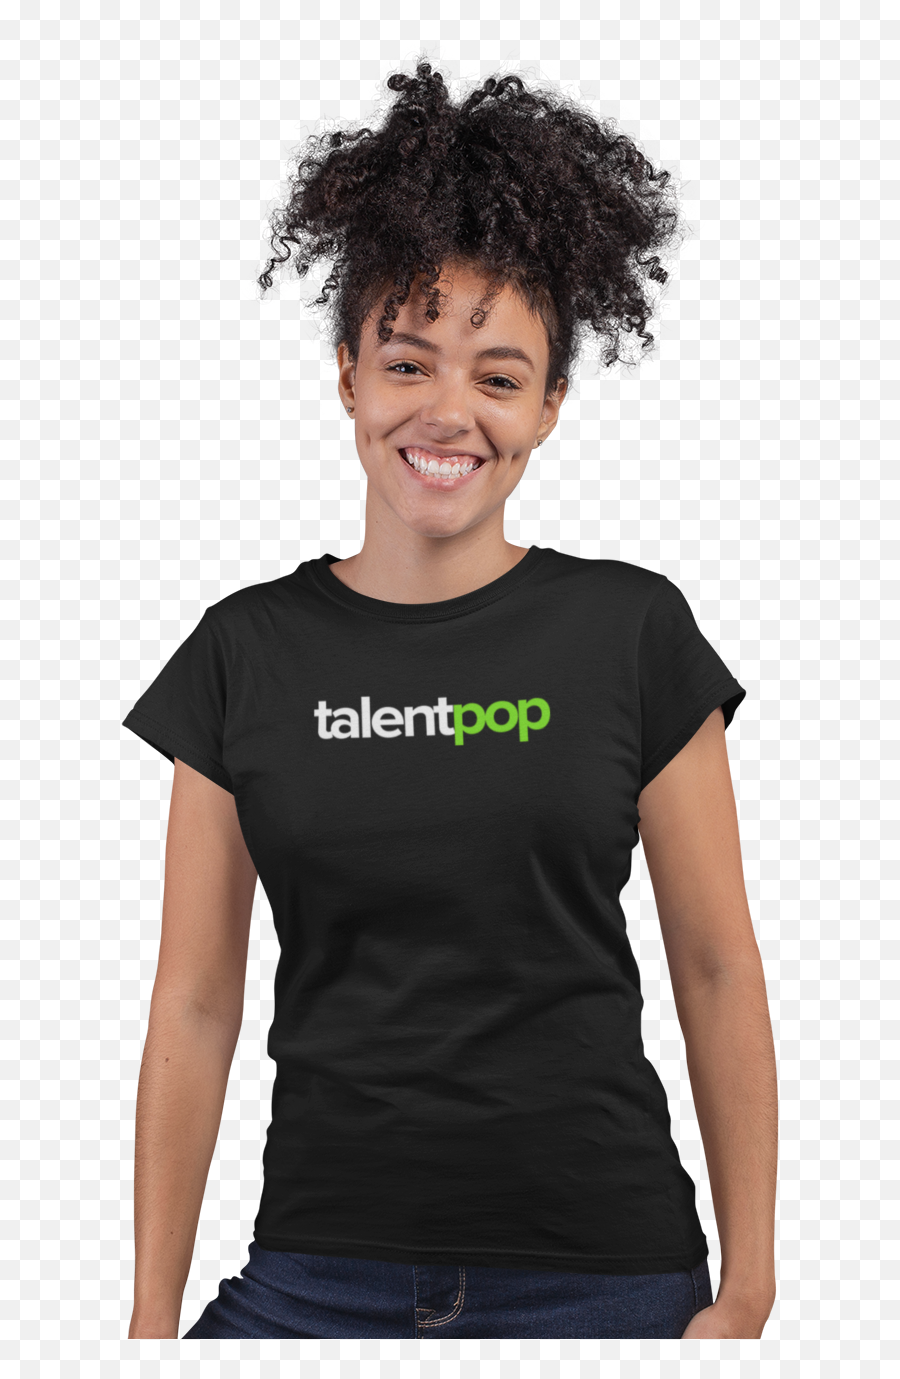 Talentpop U2013 Expertly Trained Virtual Assistants For Your - Christmas T Shirts For Besties Png,Haglofs Roc Icon Gt